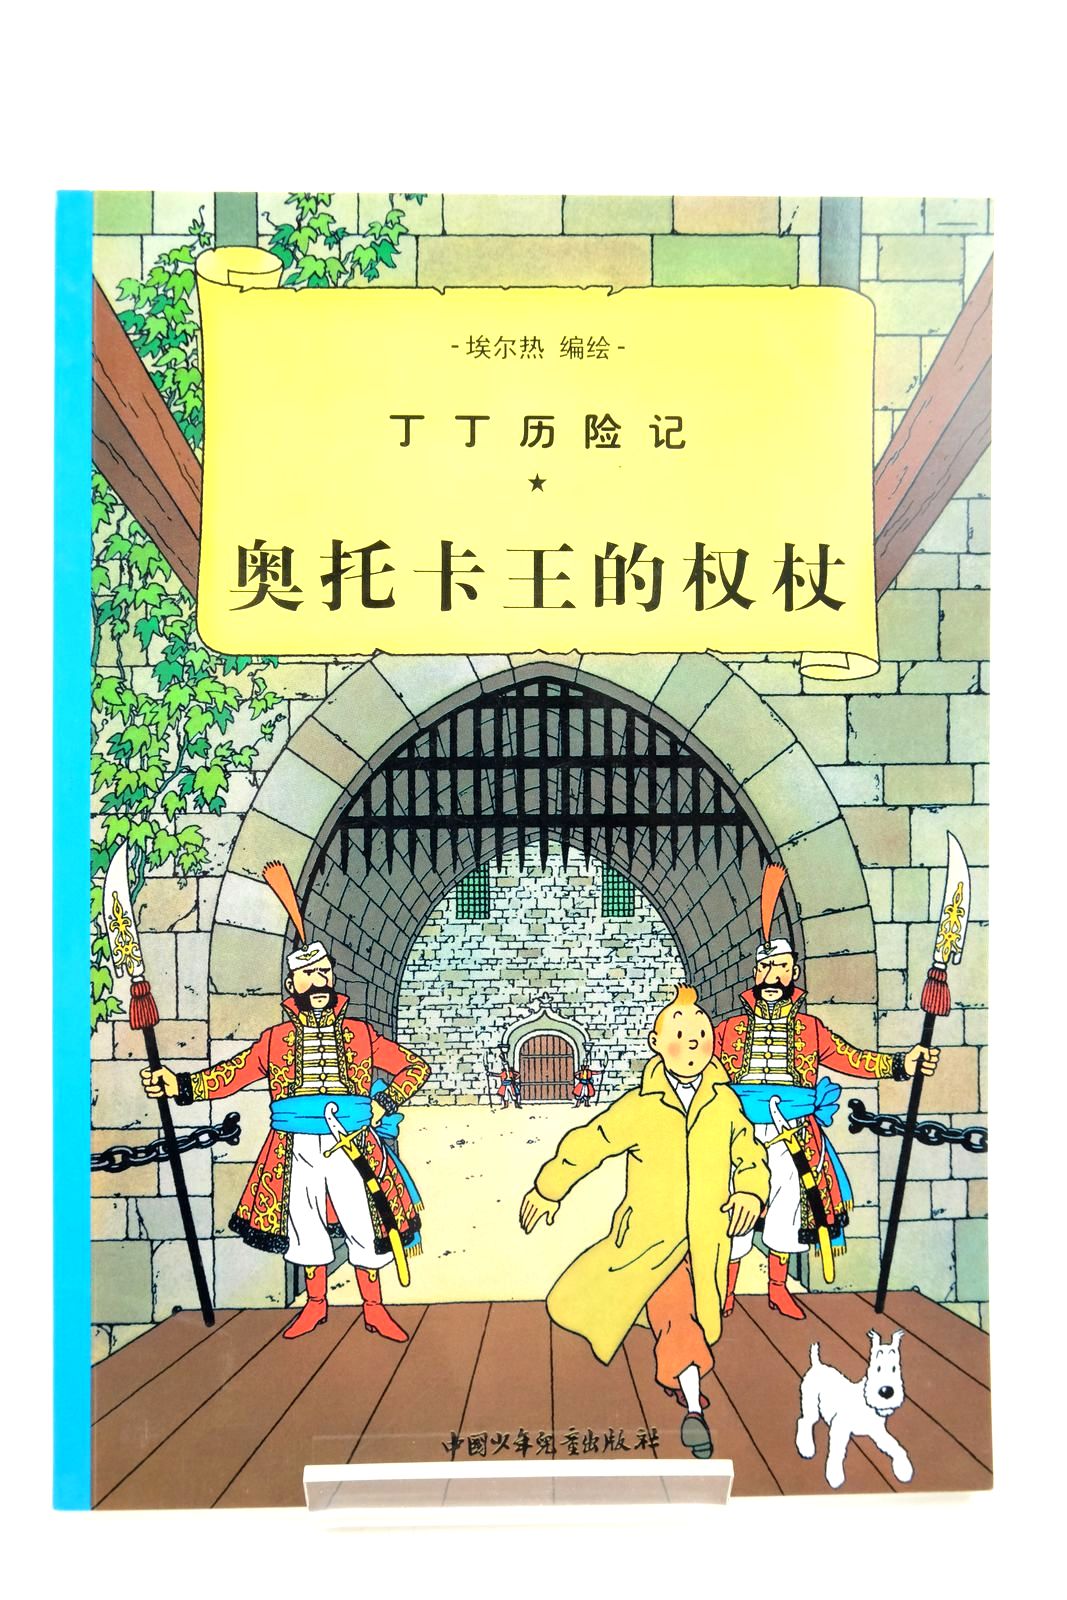 Photo of THE ADVENTURES OF TINTIN: KING OTTOKARS SCEPTRE (CHINESE LANGUAGE EDITION) written by Herge, illustrated by Herge, published by China Press (STOCK CODE: 2140356)  for sale by Stella & Rose's Books